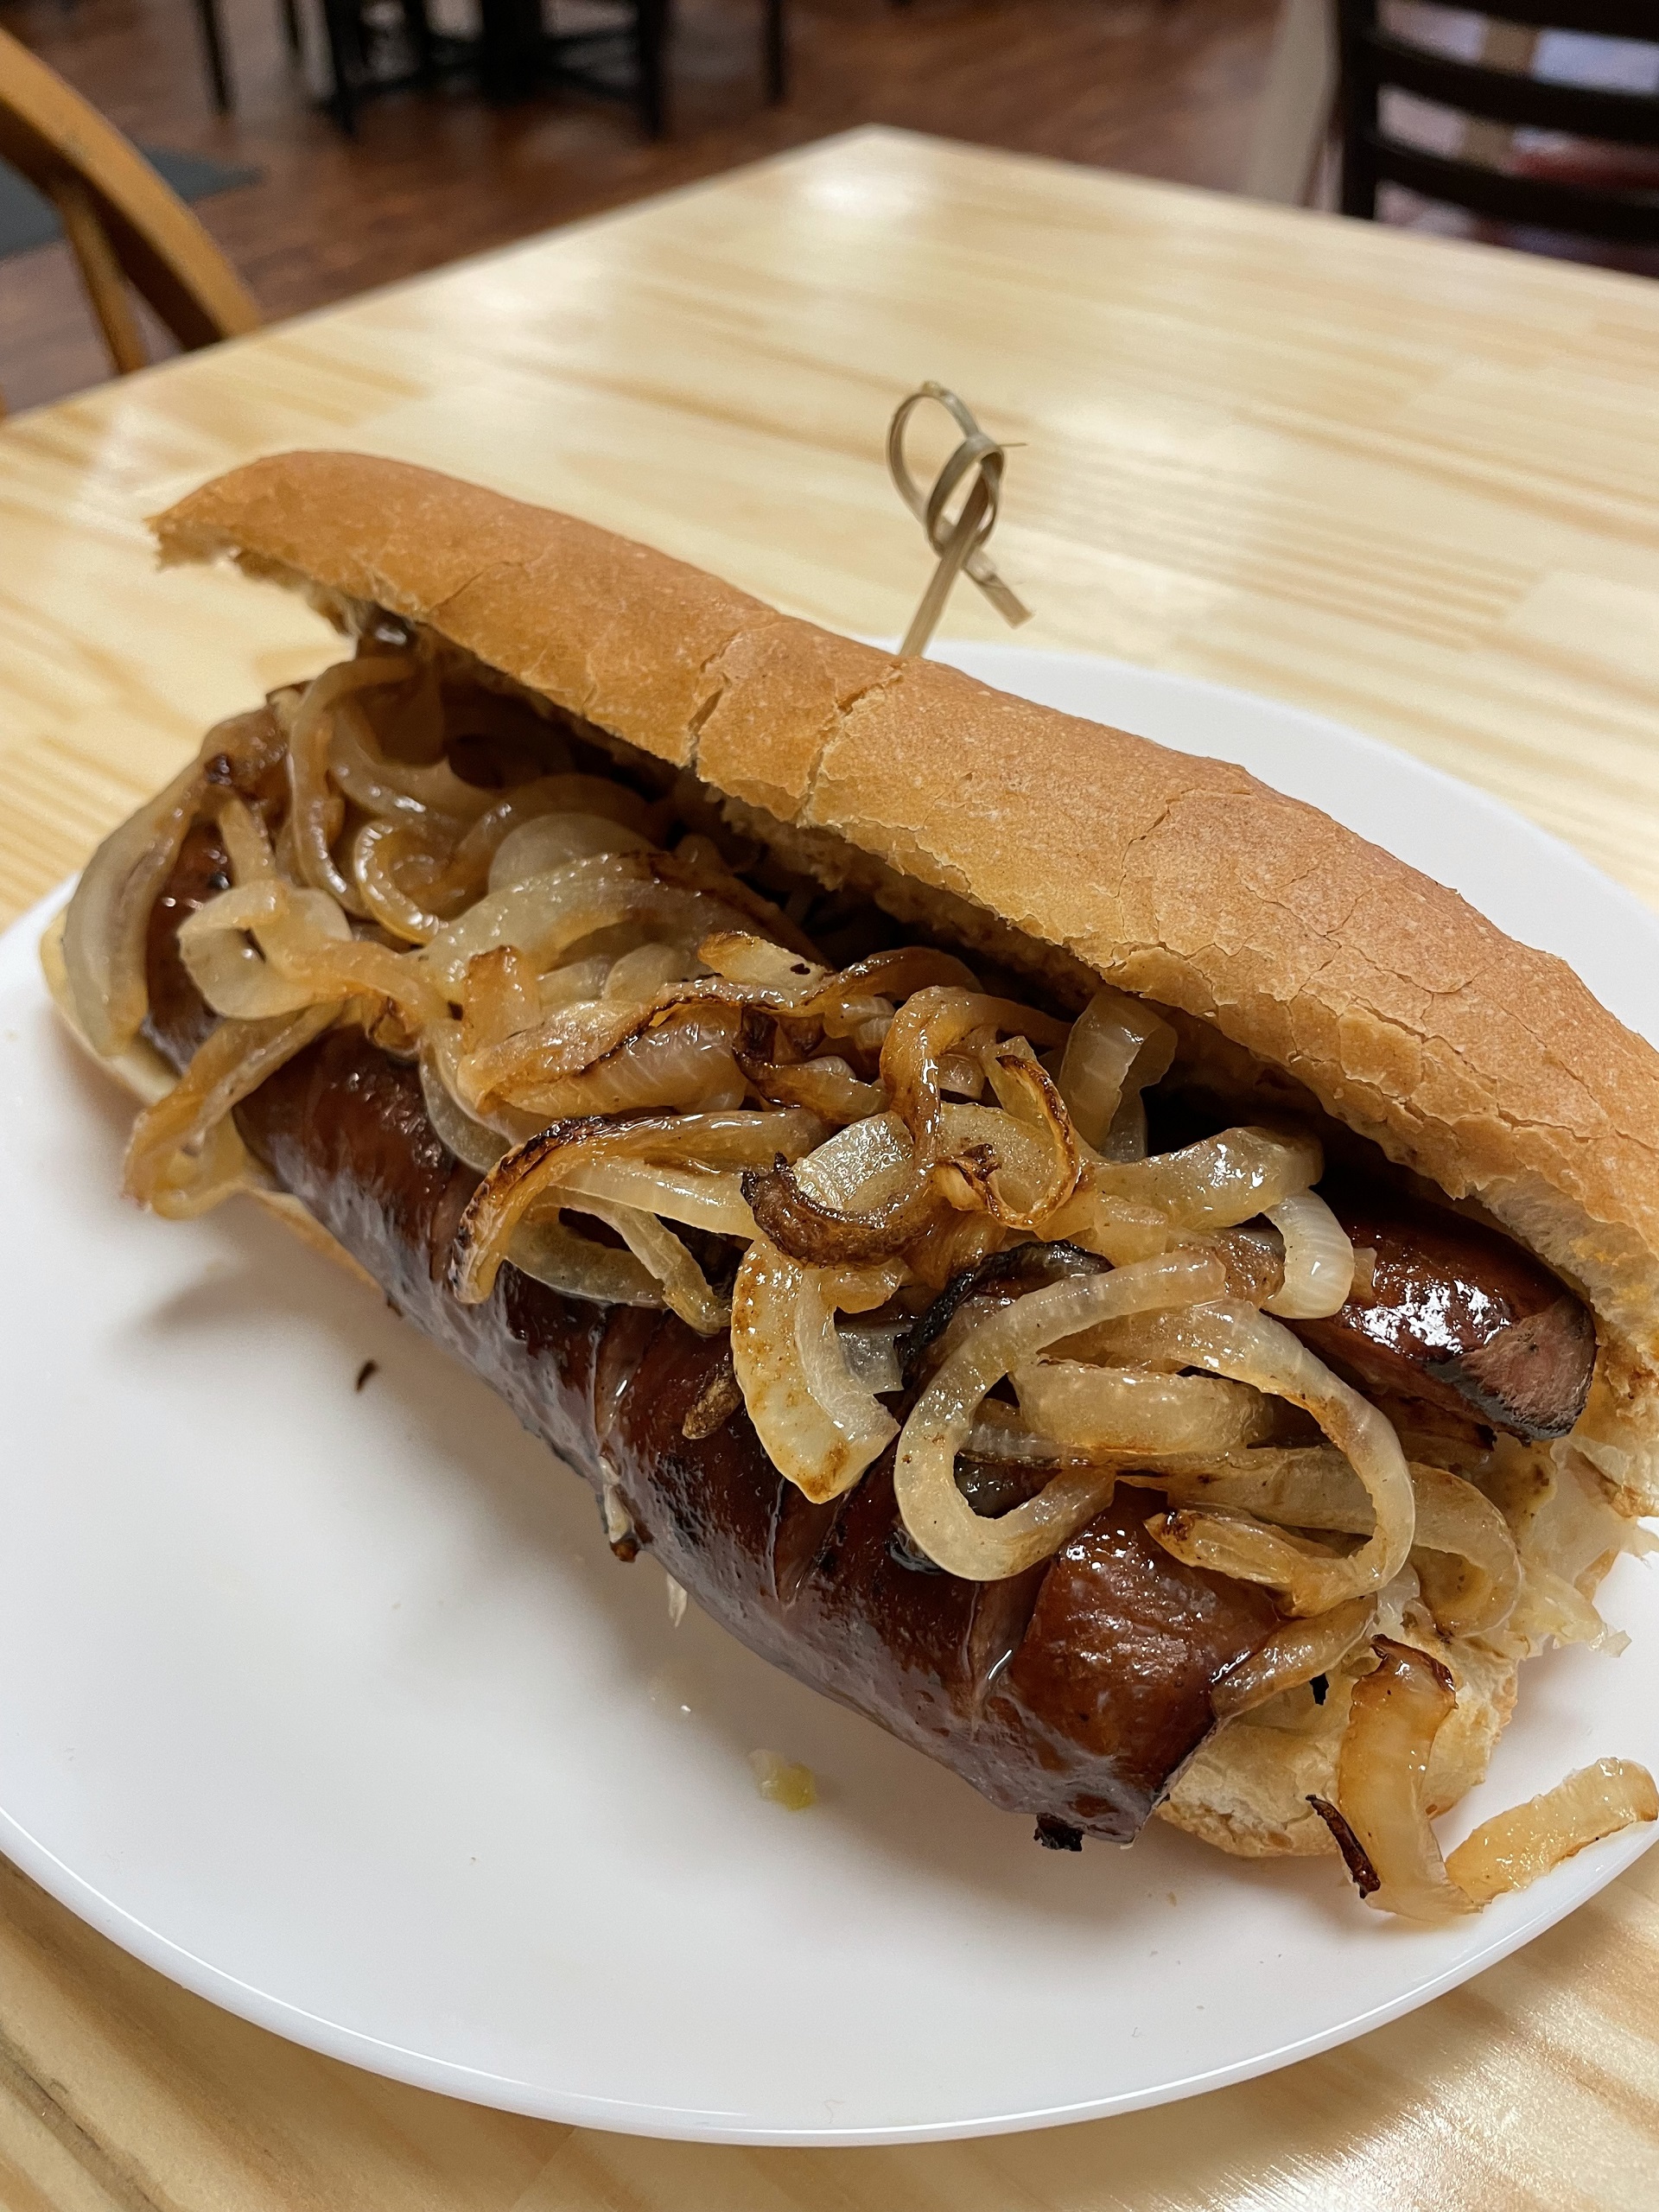 Kat's Polish Fried Kielbasa with Onions Hoagie on a white plate served on an ash wood table at the cafe-restaurant in Minersville, Pennsylvania.